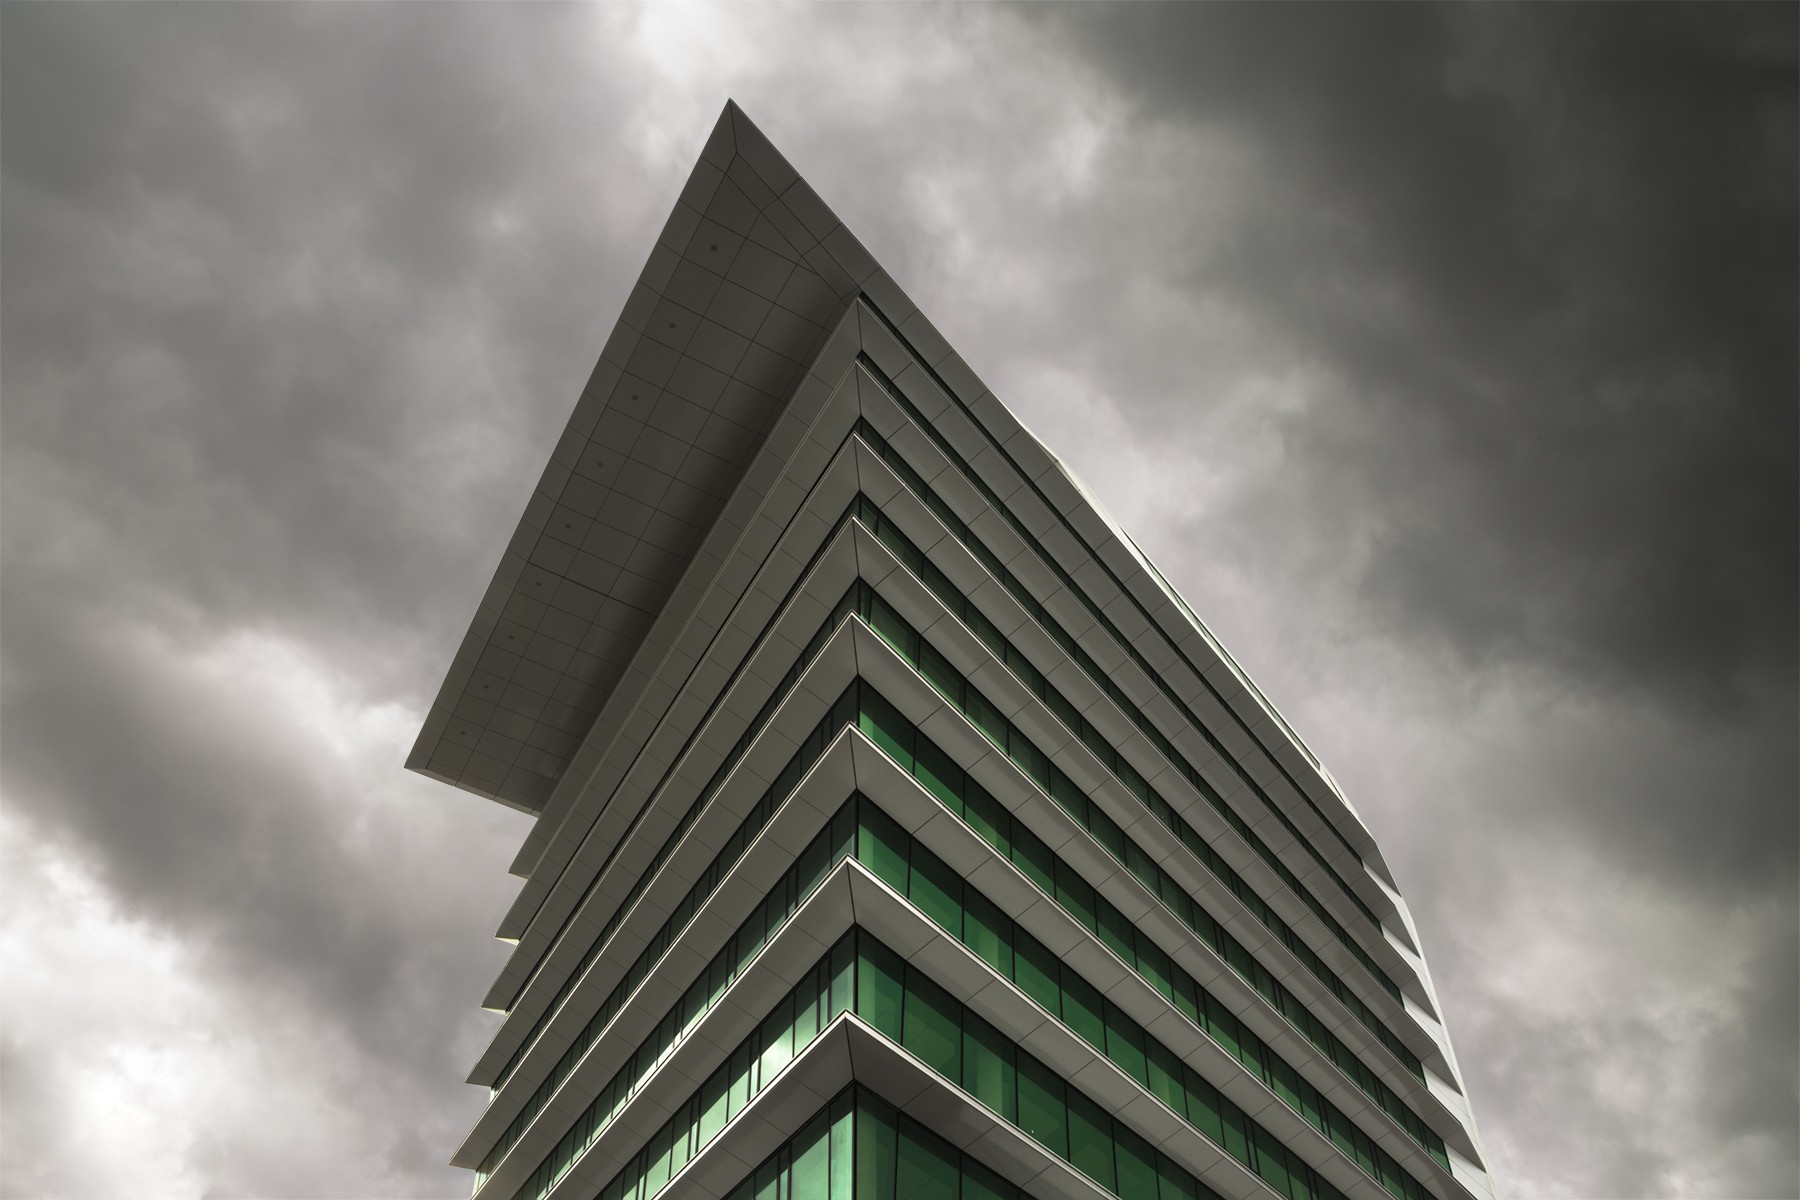 General 1800x1200 photography architecture building skyscraper clouds storm minimalism glass facade